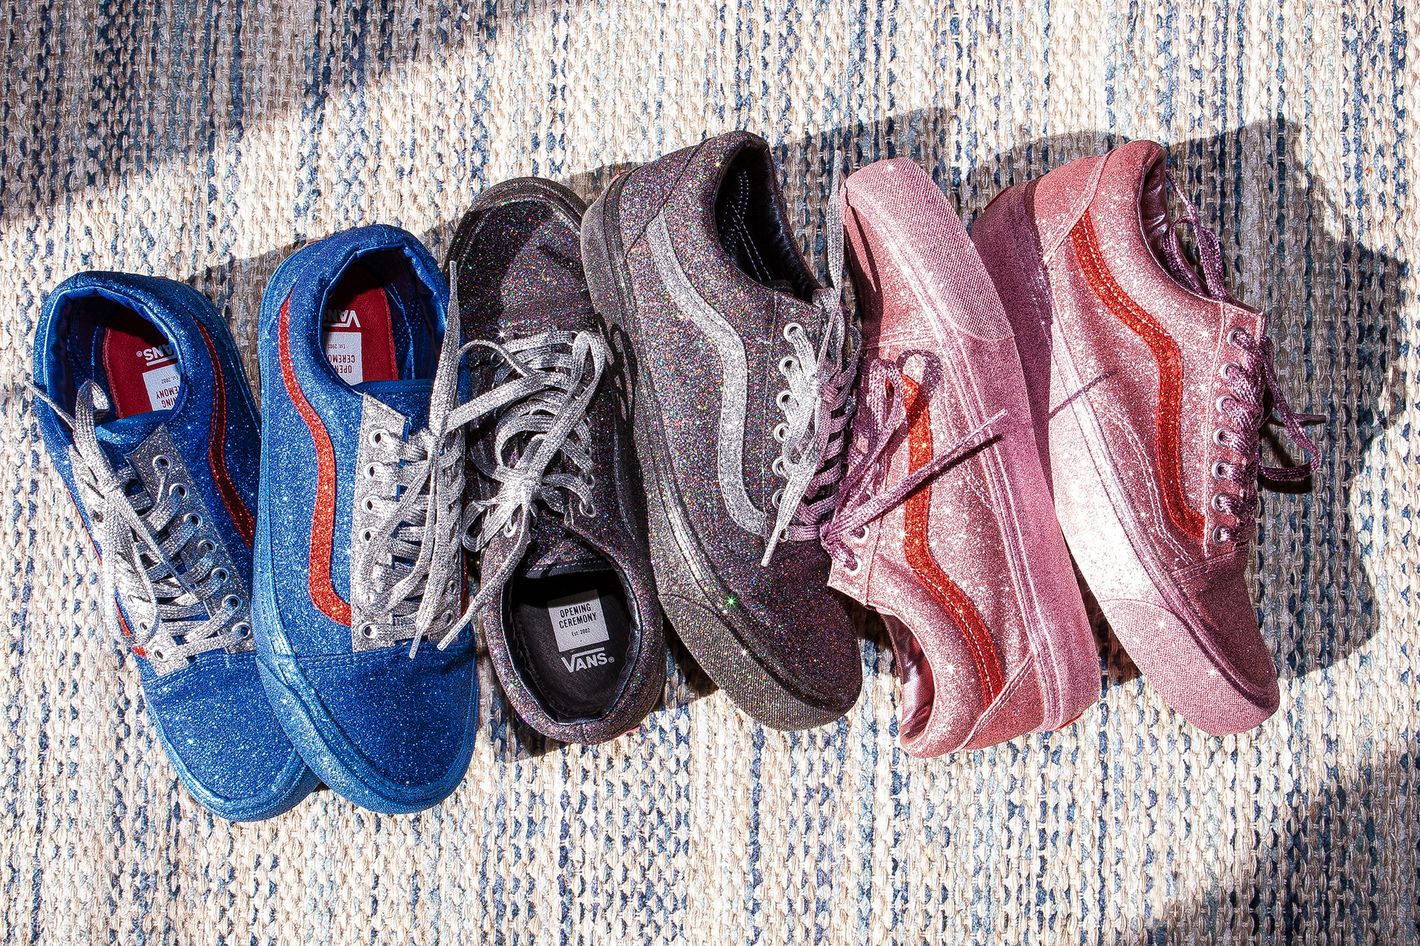 Vans x Opening Ceremony: Get the New Glittery Sneakers Now